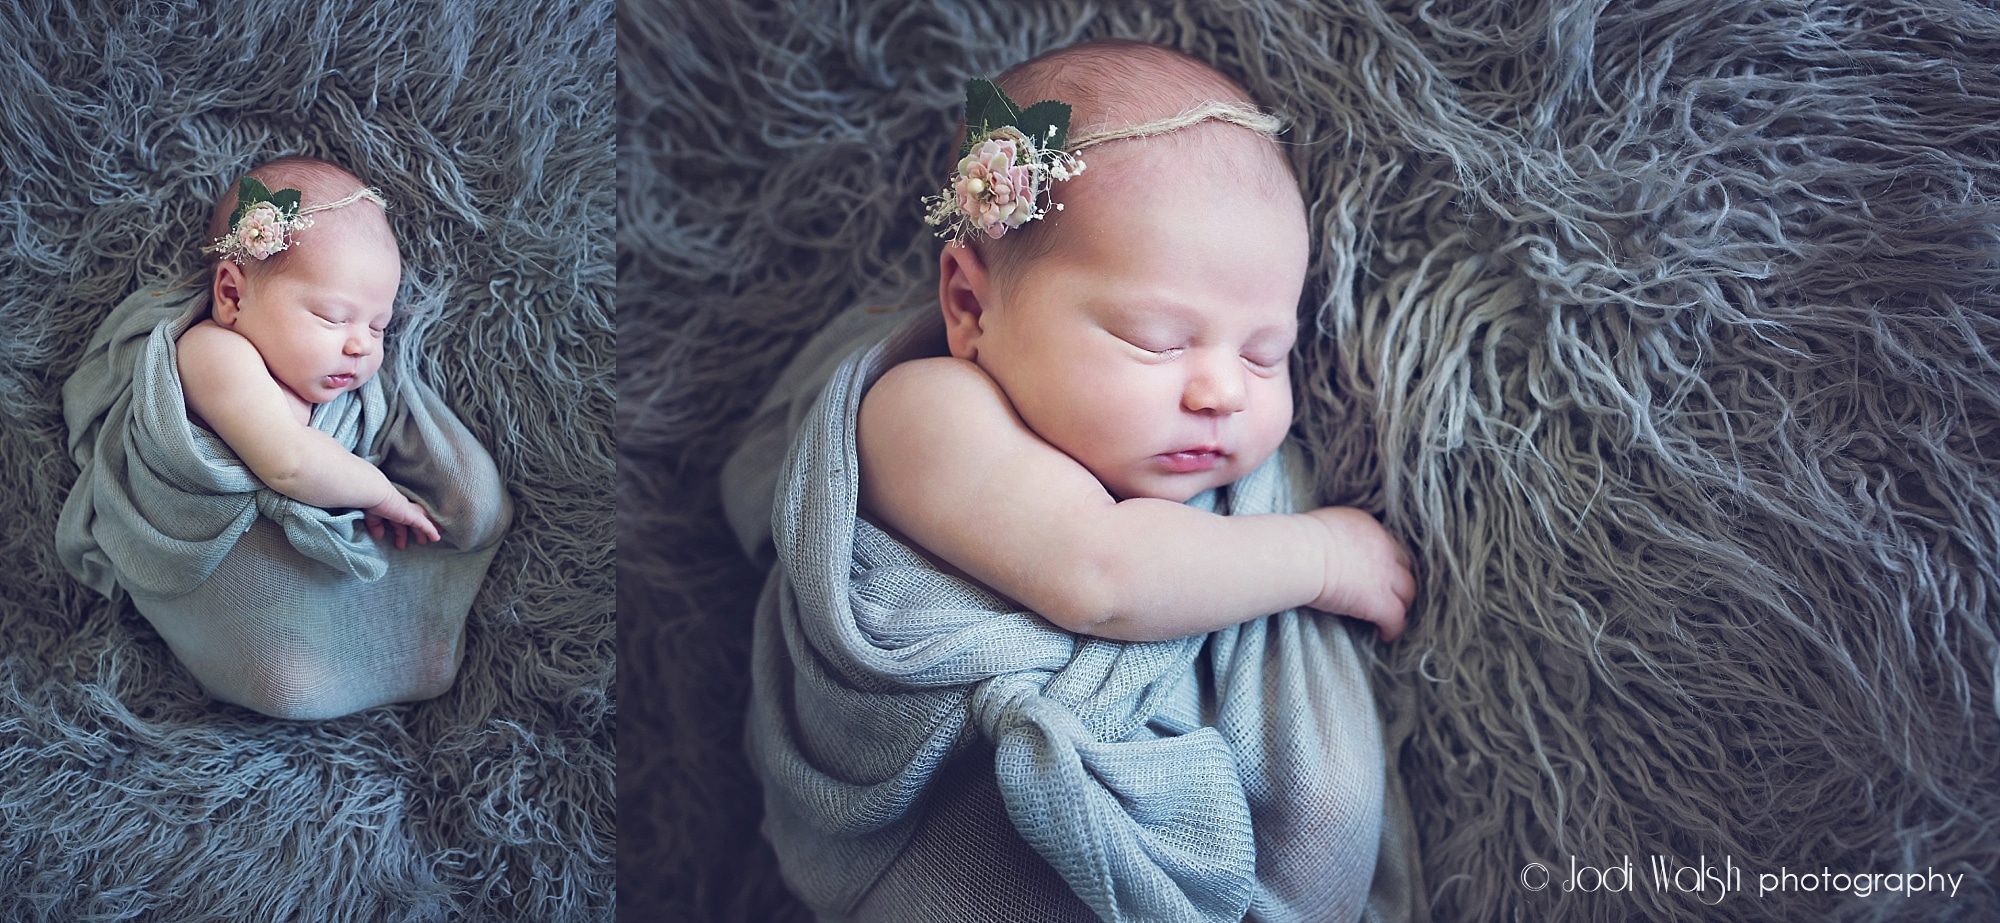 posed newborn photography with gray wrap and flower band